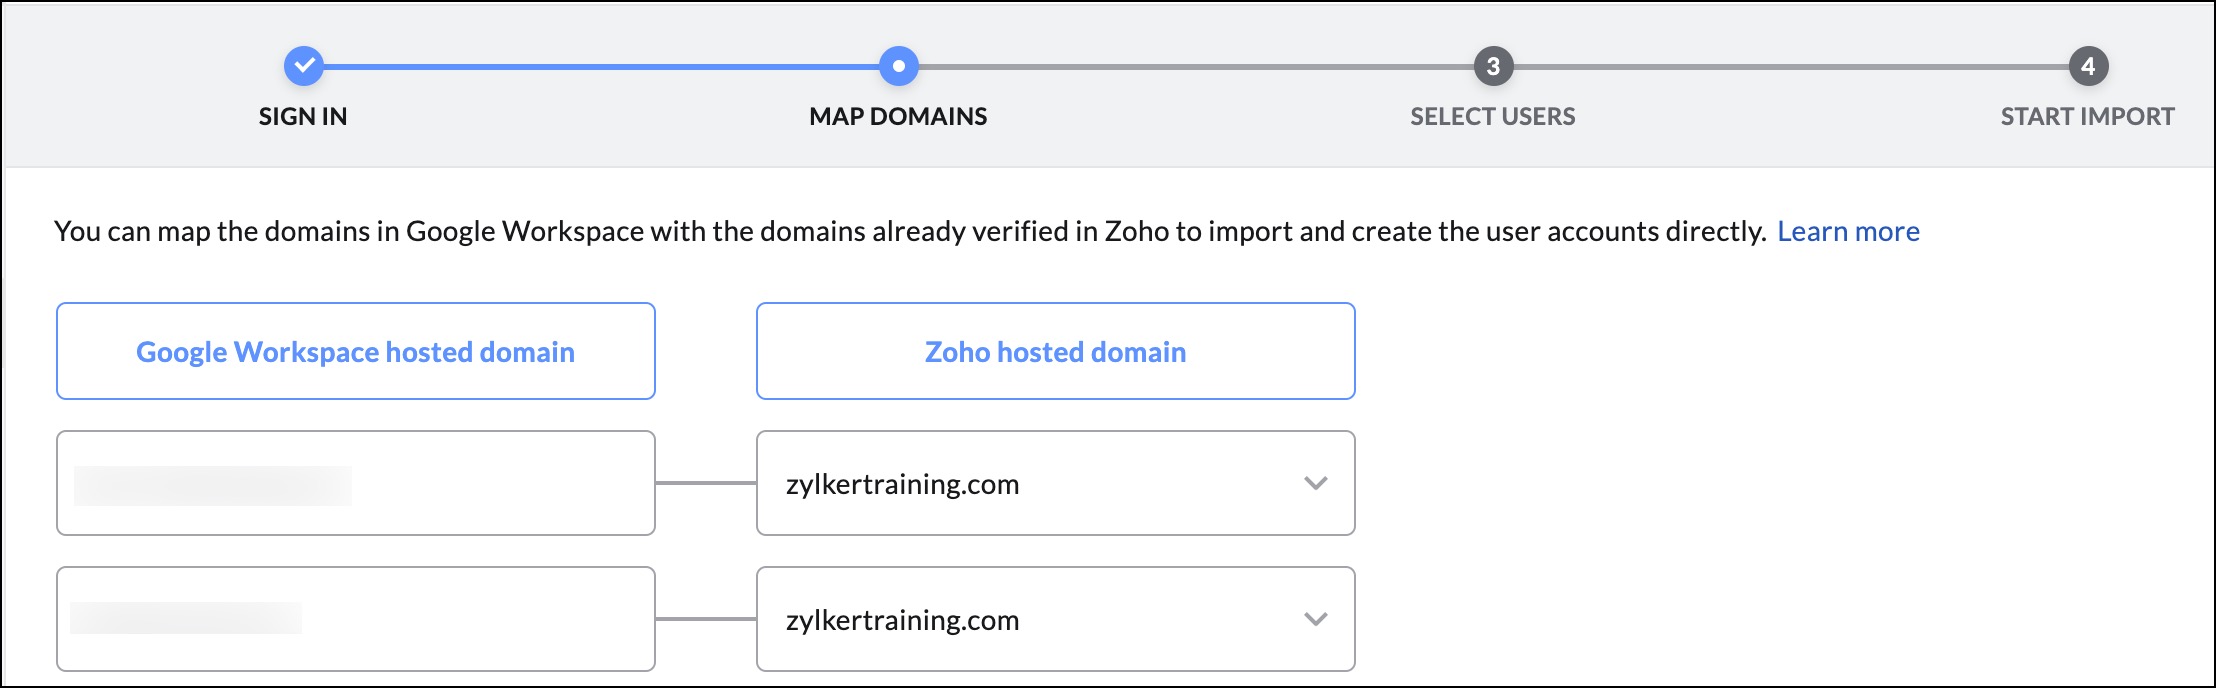 map domains for user import from Google Workspace